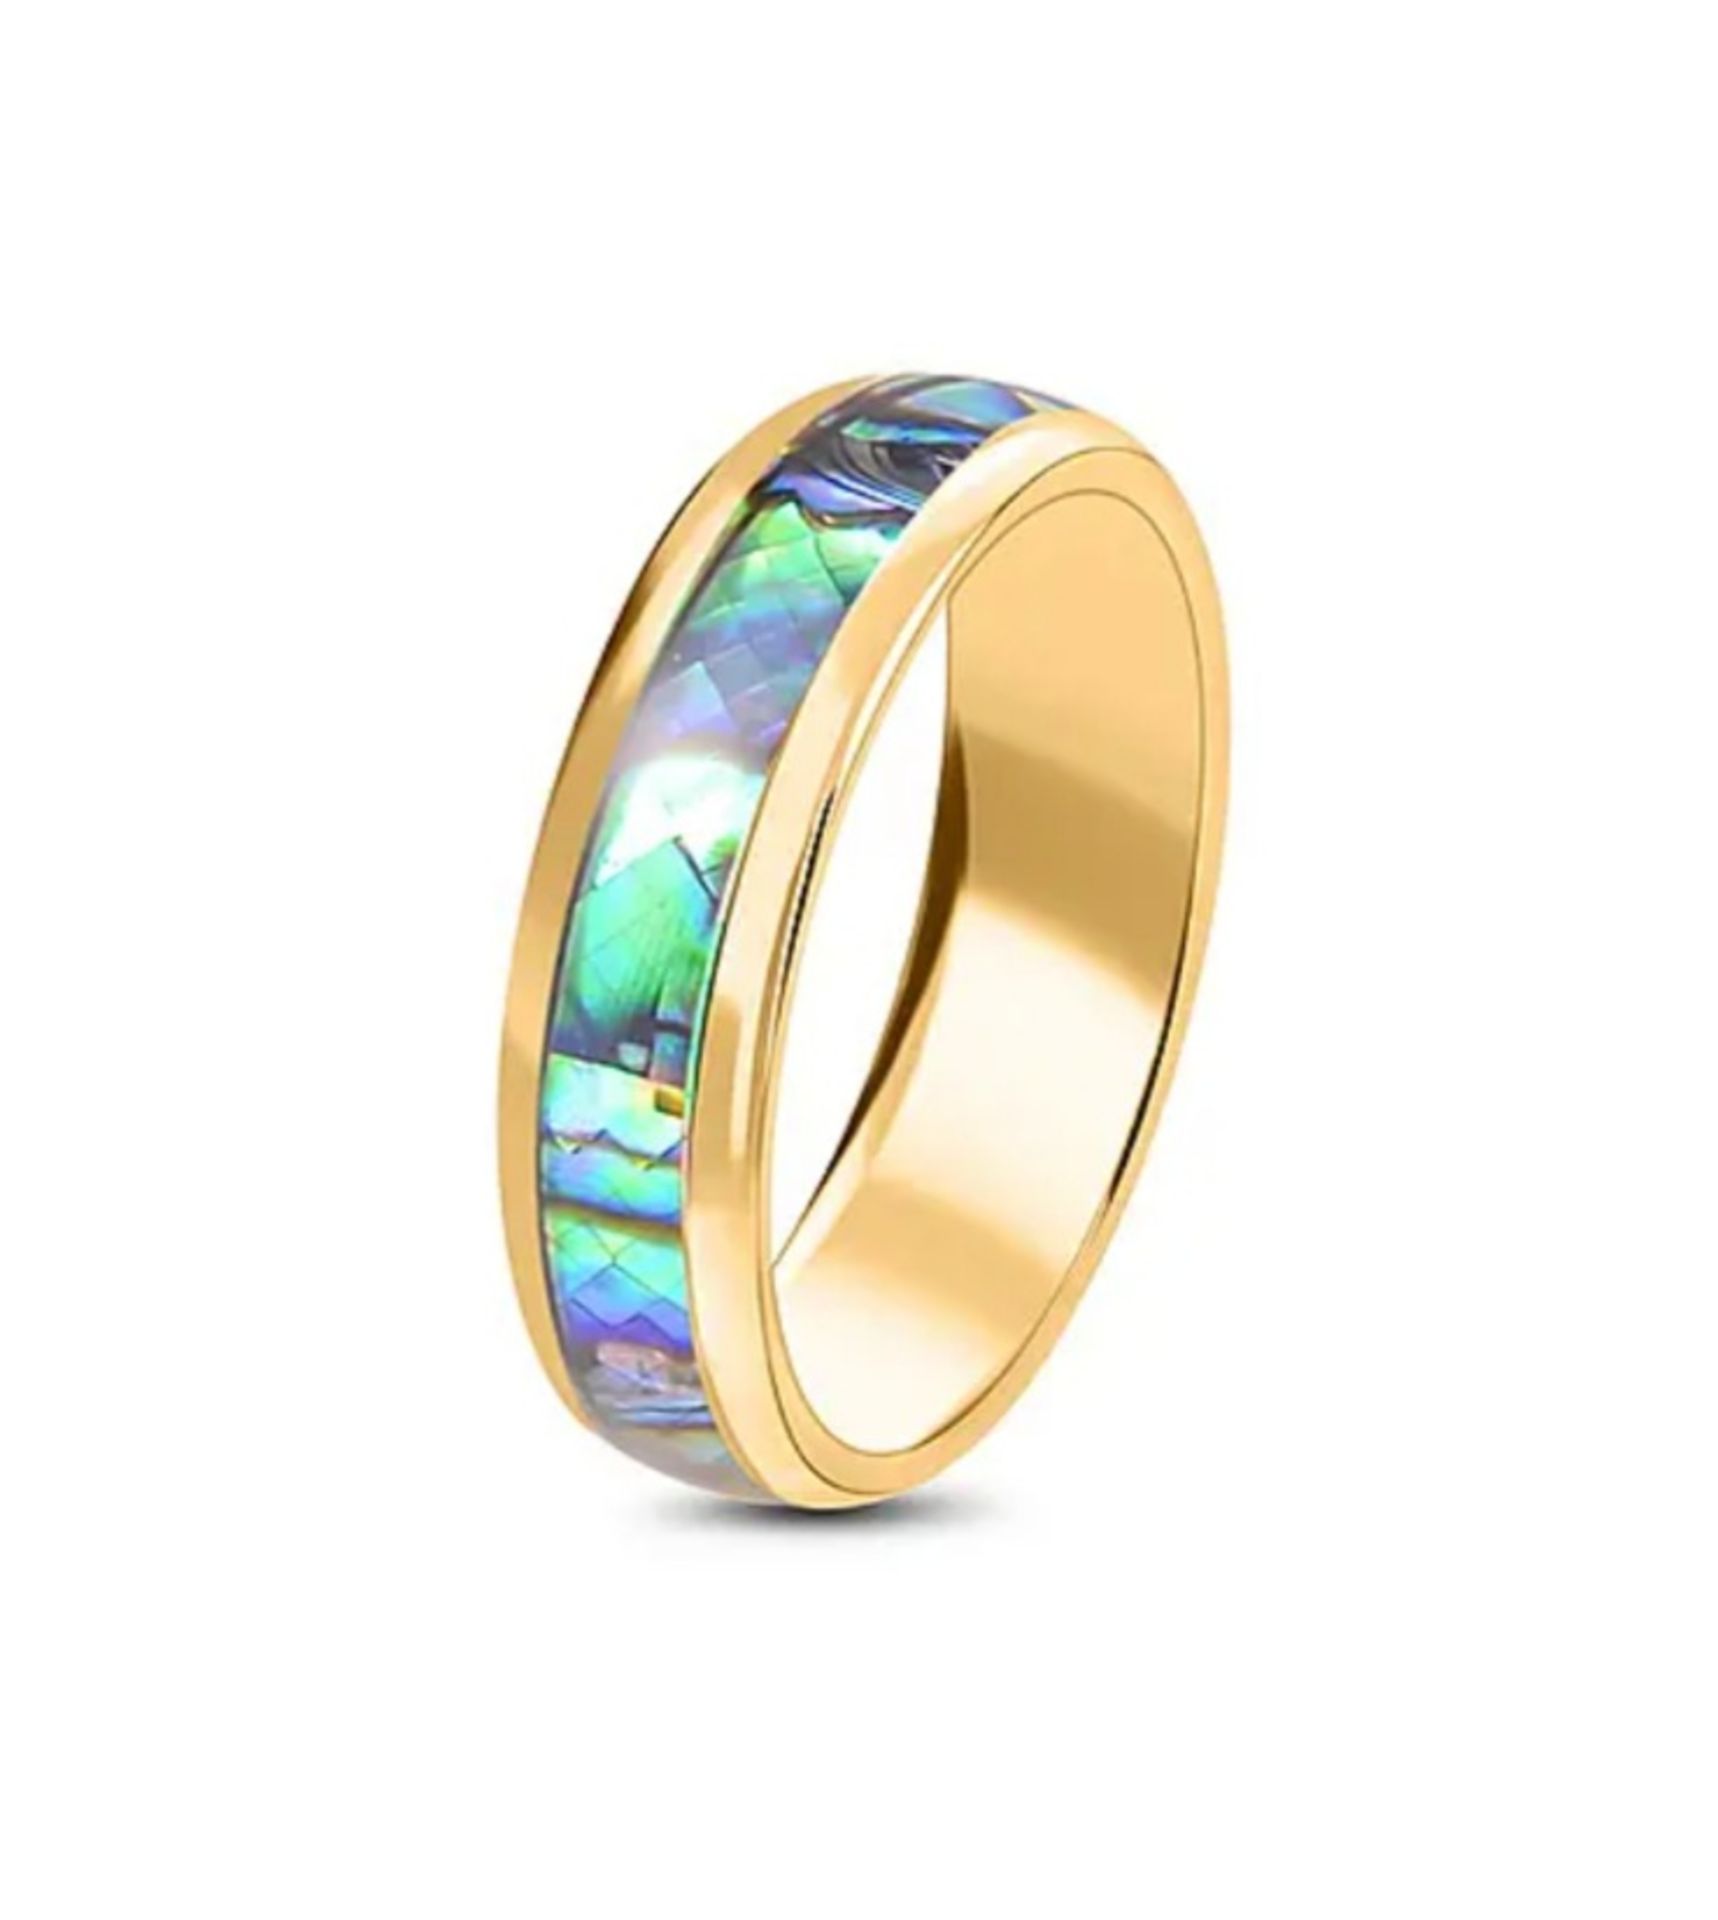 NEW! Abalone Shell Band Ring - Image 4 of 4